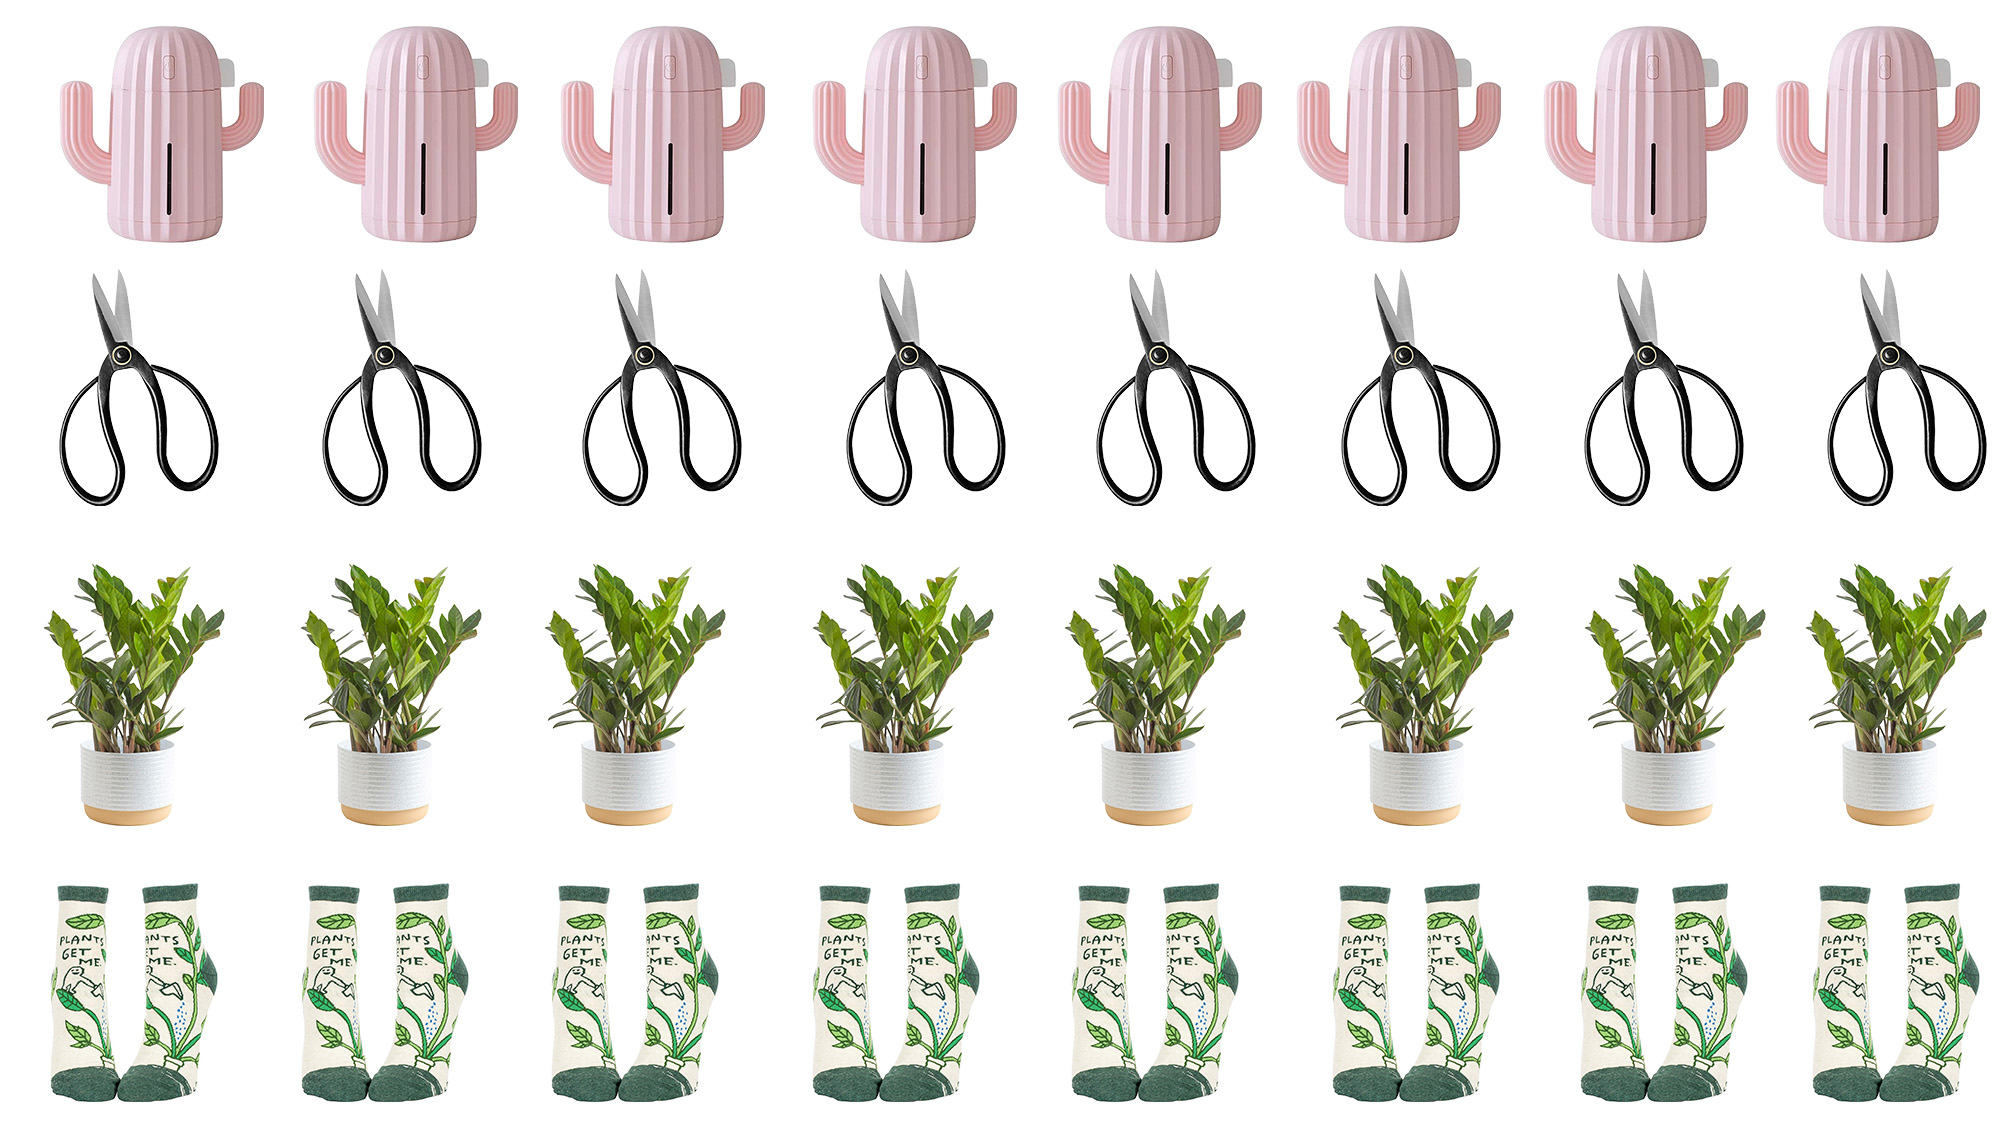 Gifts to help new plant parents grow their love of plants